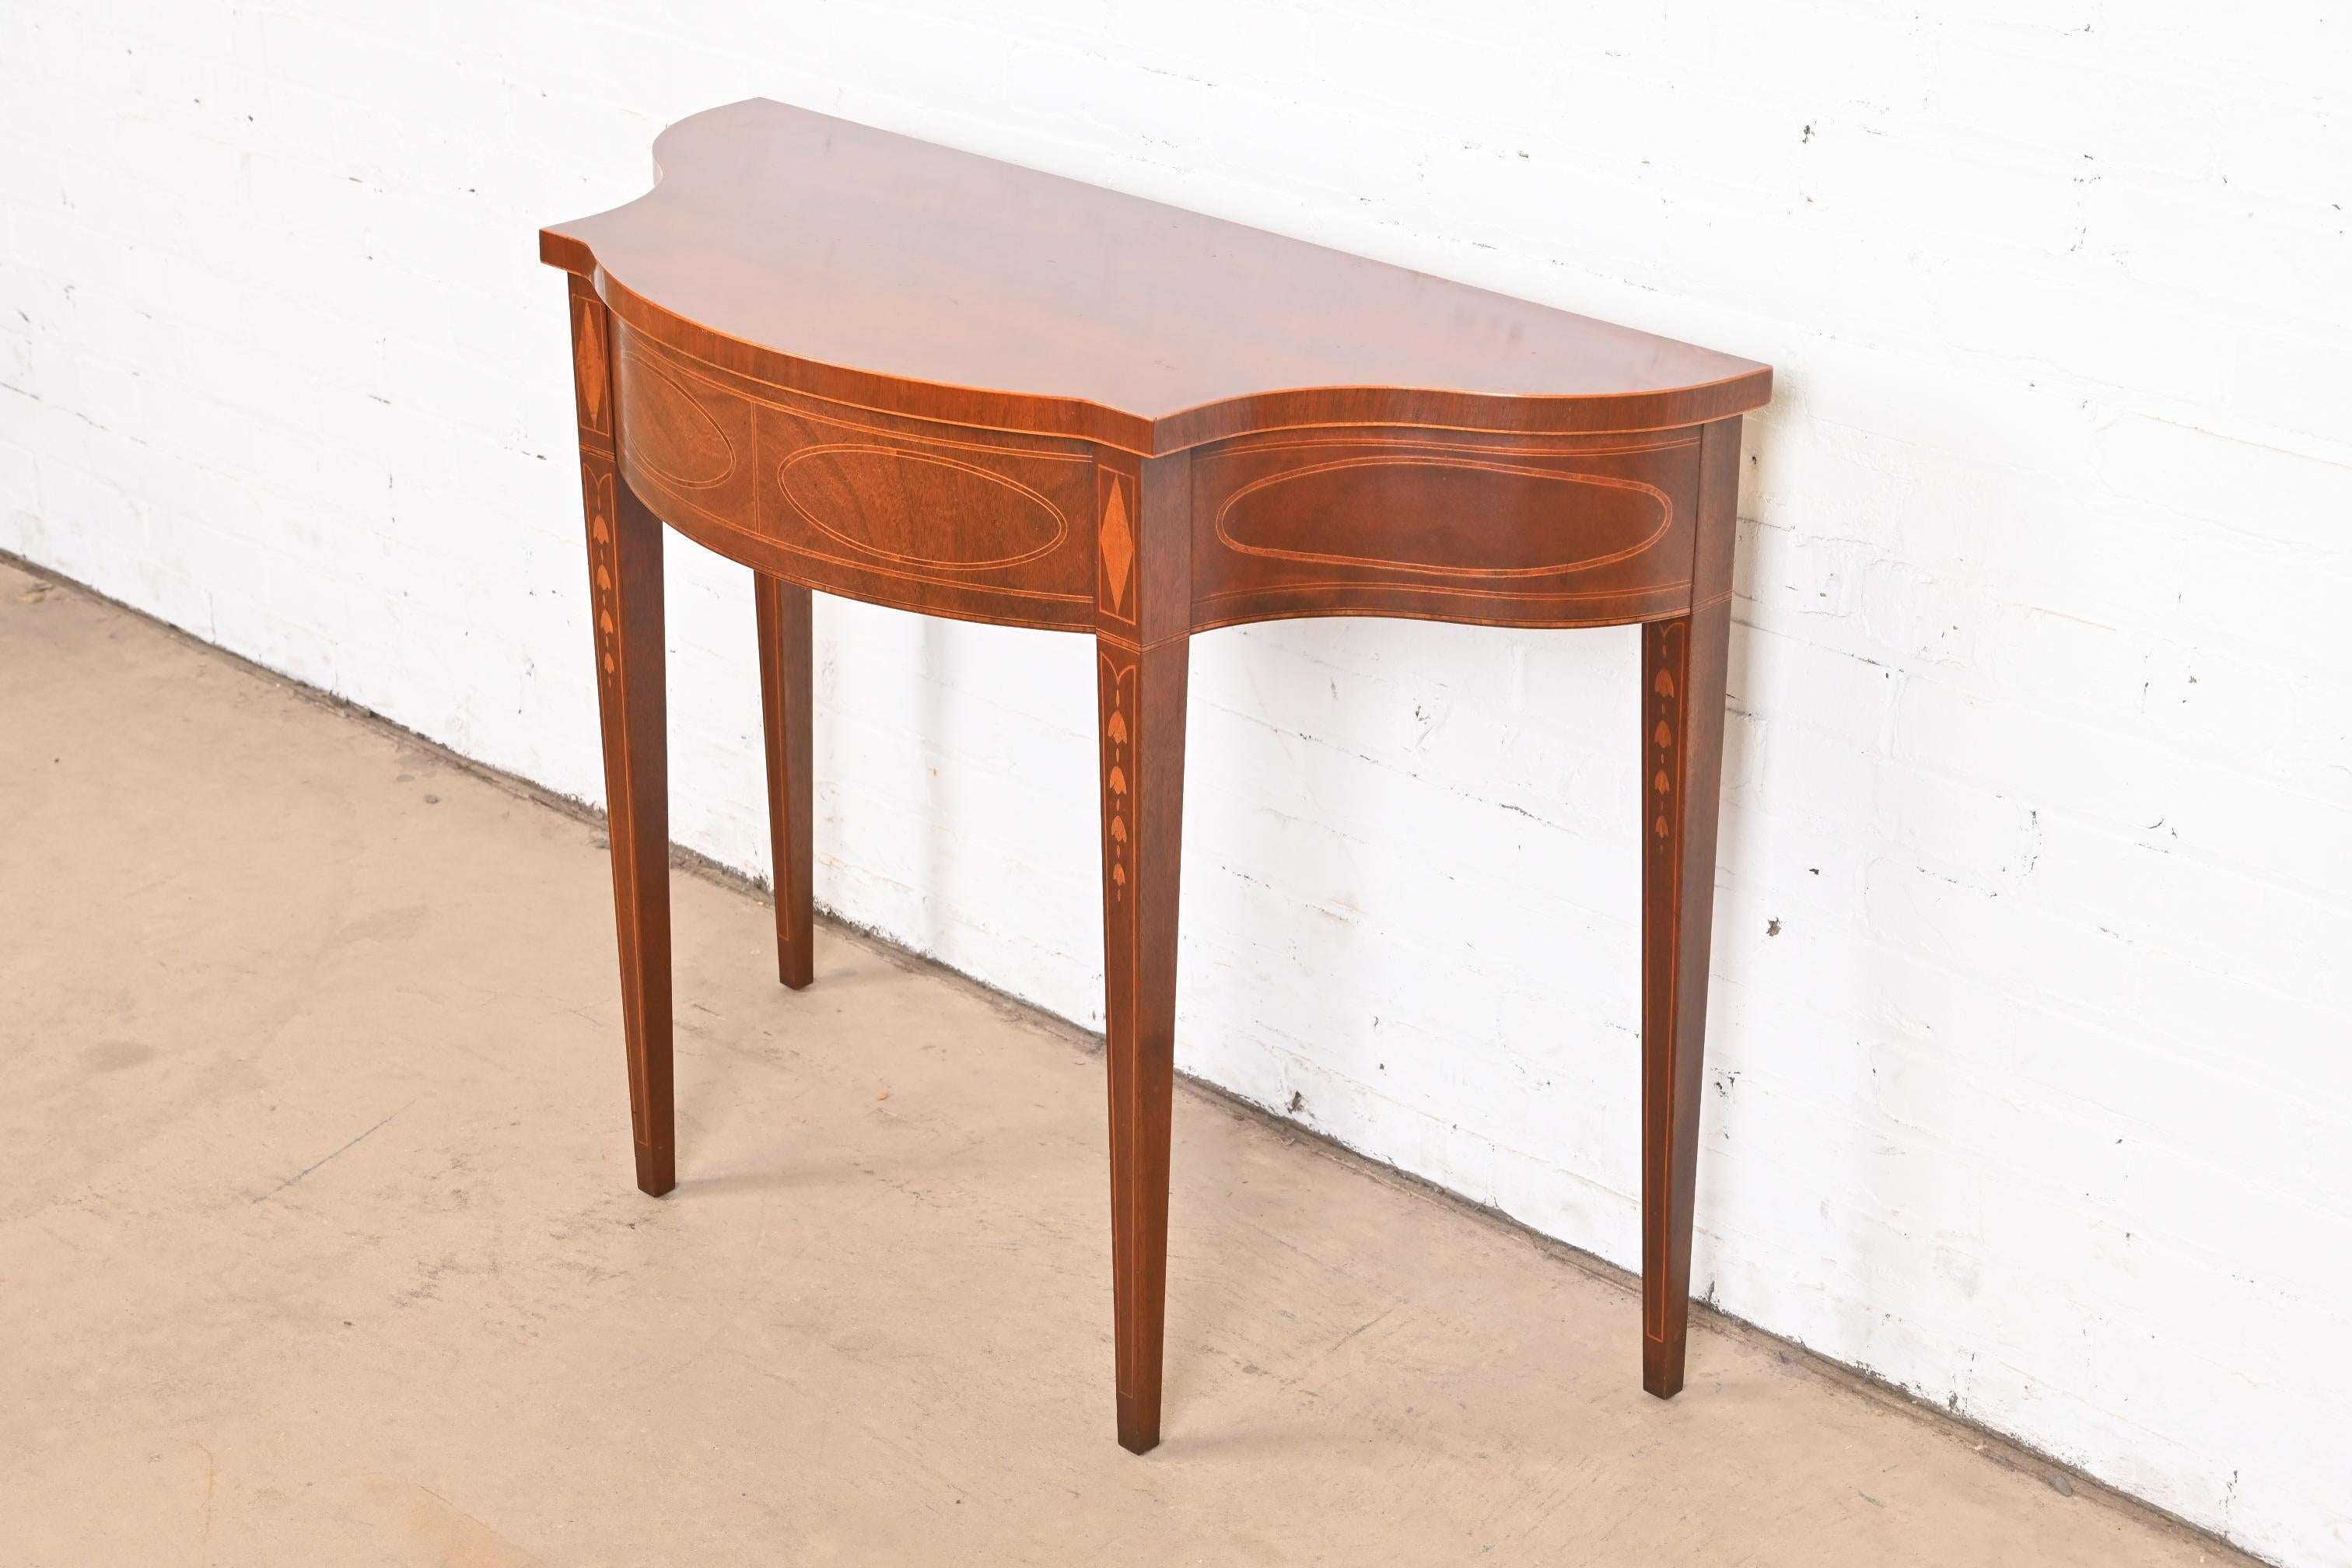 Baker Furniture Historic Charleston Federal Inlaid Mahogany Console Table In Good Condition For Sale In South Bend, IN